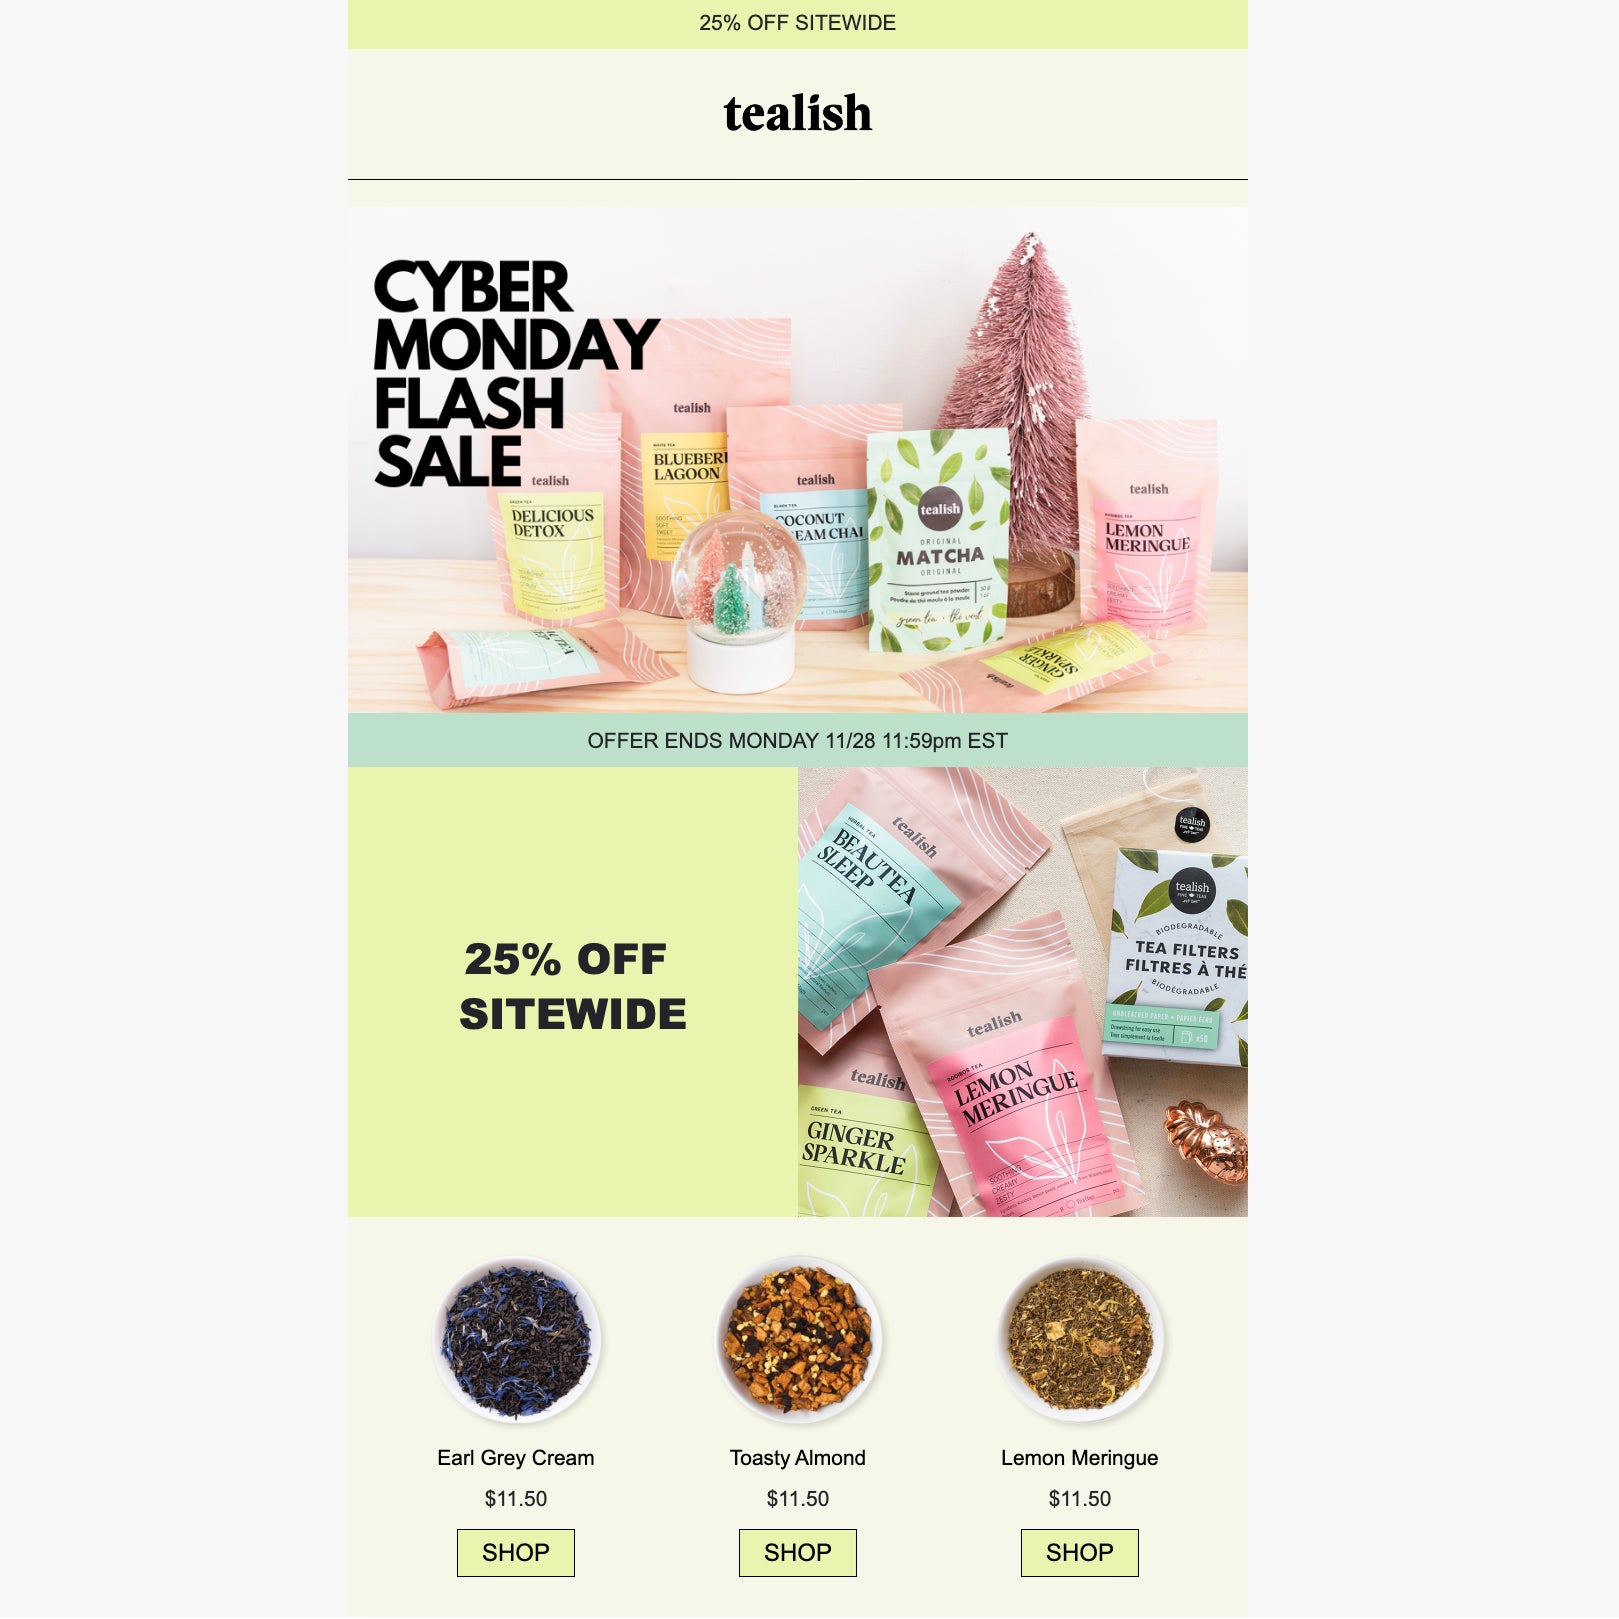 An email marketing example from brand tealish